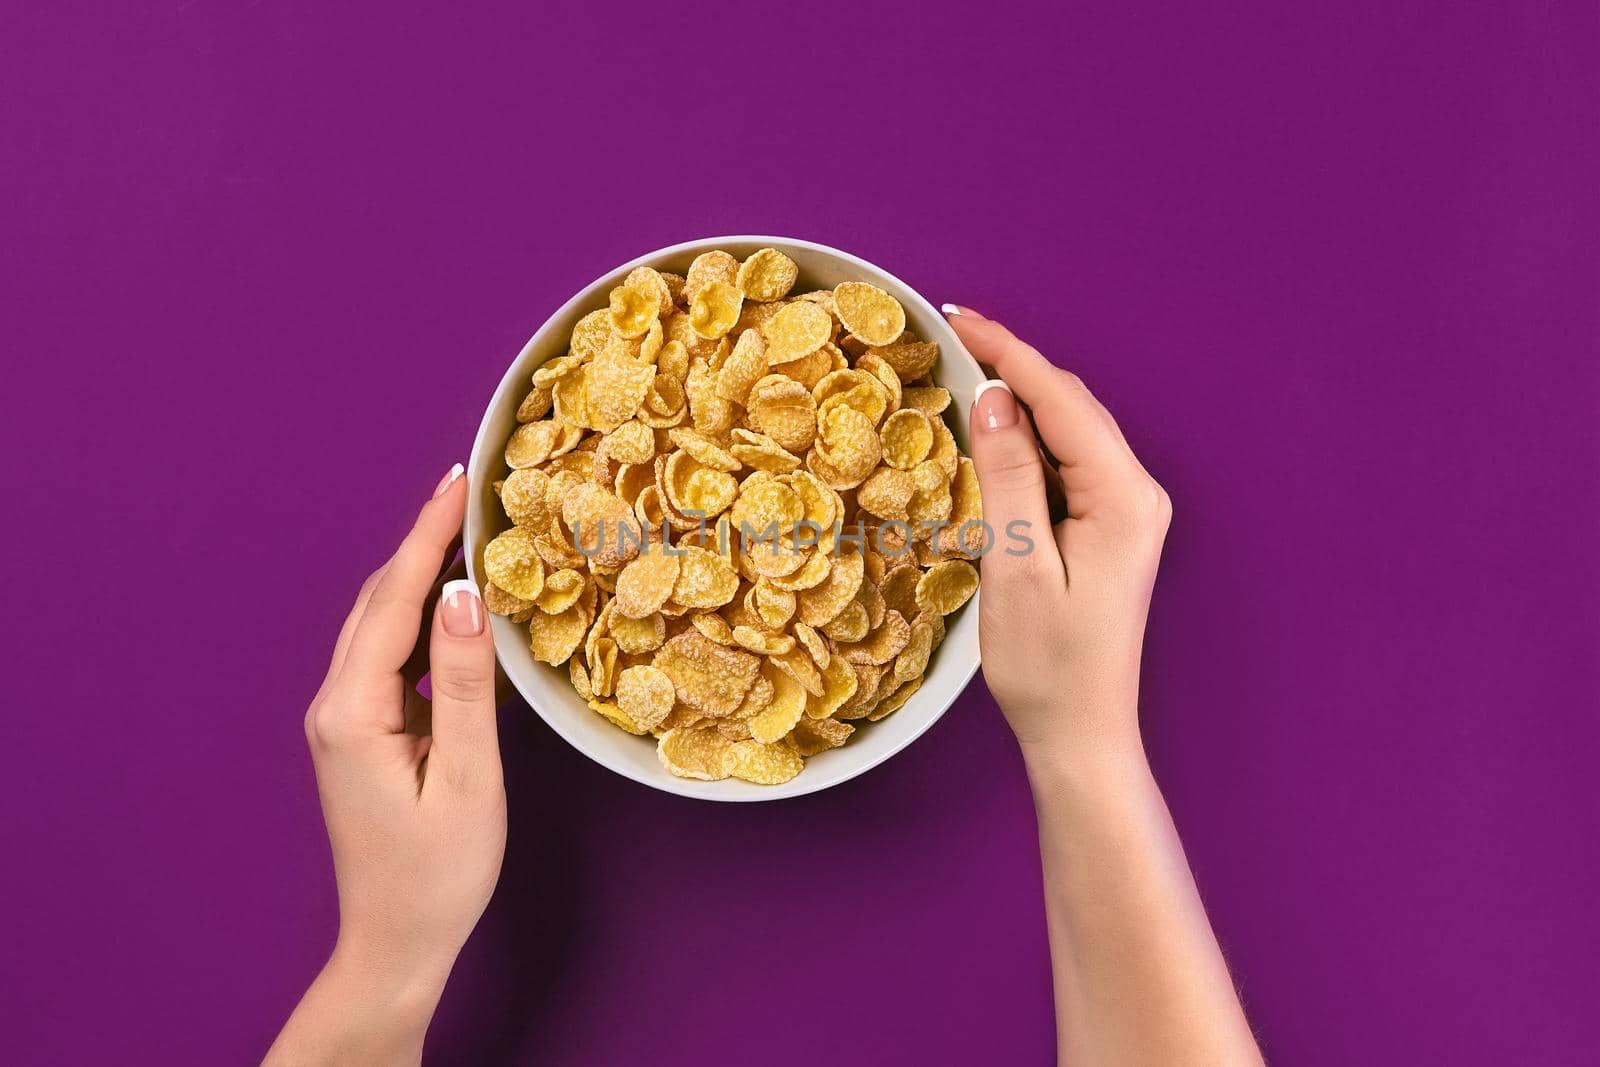 Female hands holding bowl with healthy breakfast, closeup. Bowl with cornflakes on the colorful background. Purple background, top view. Copy space. Still life. Flat lay